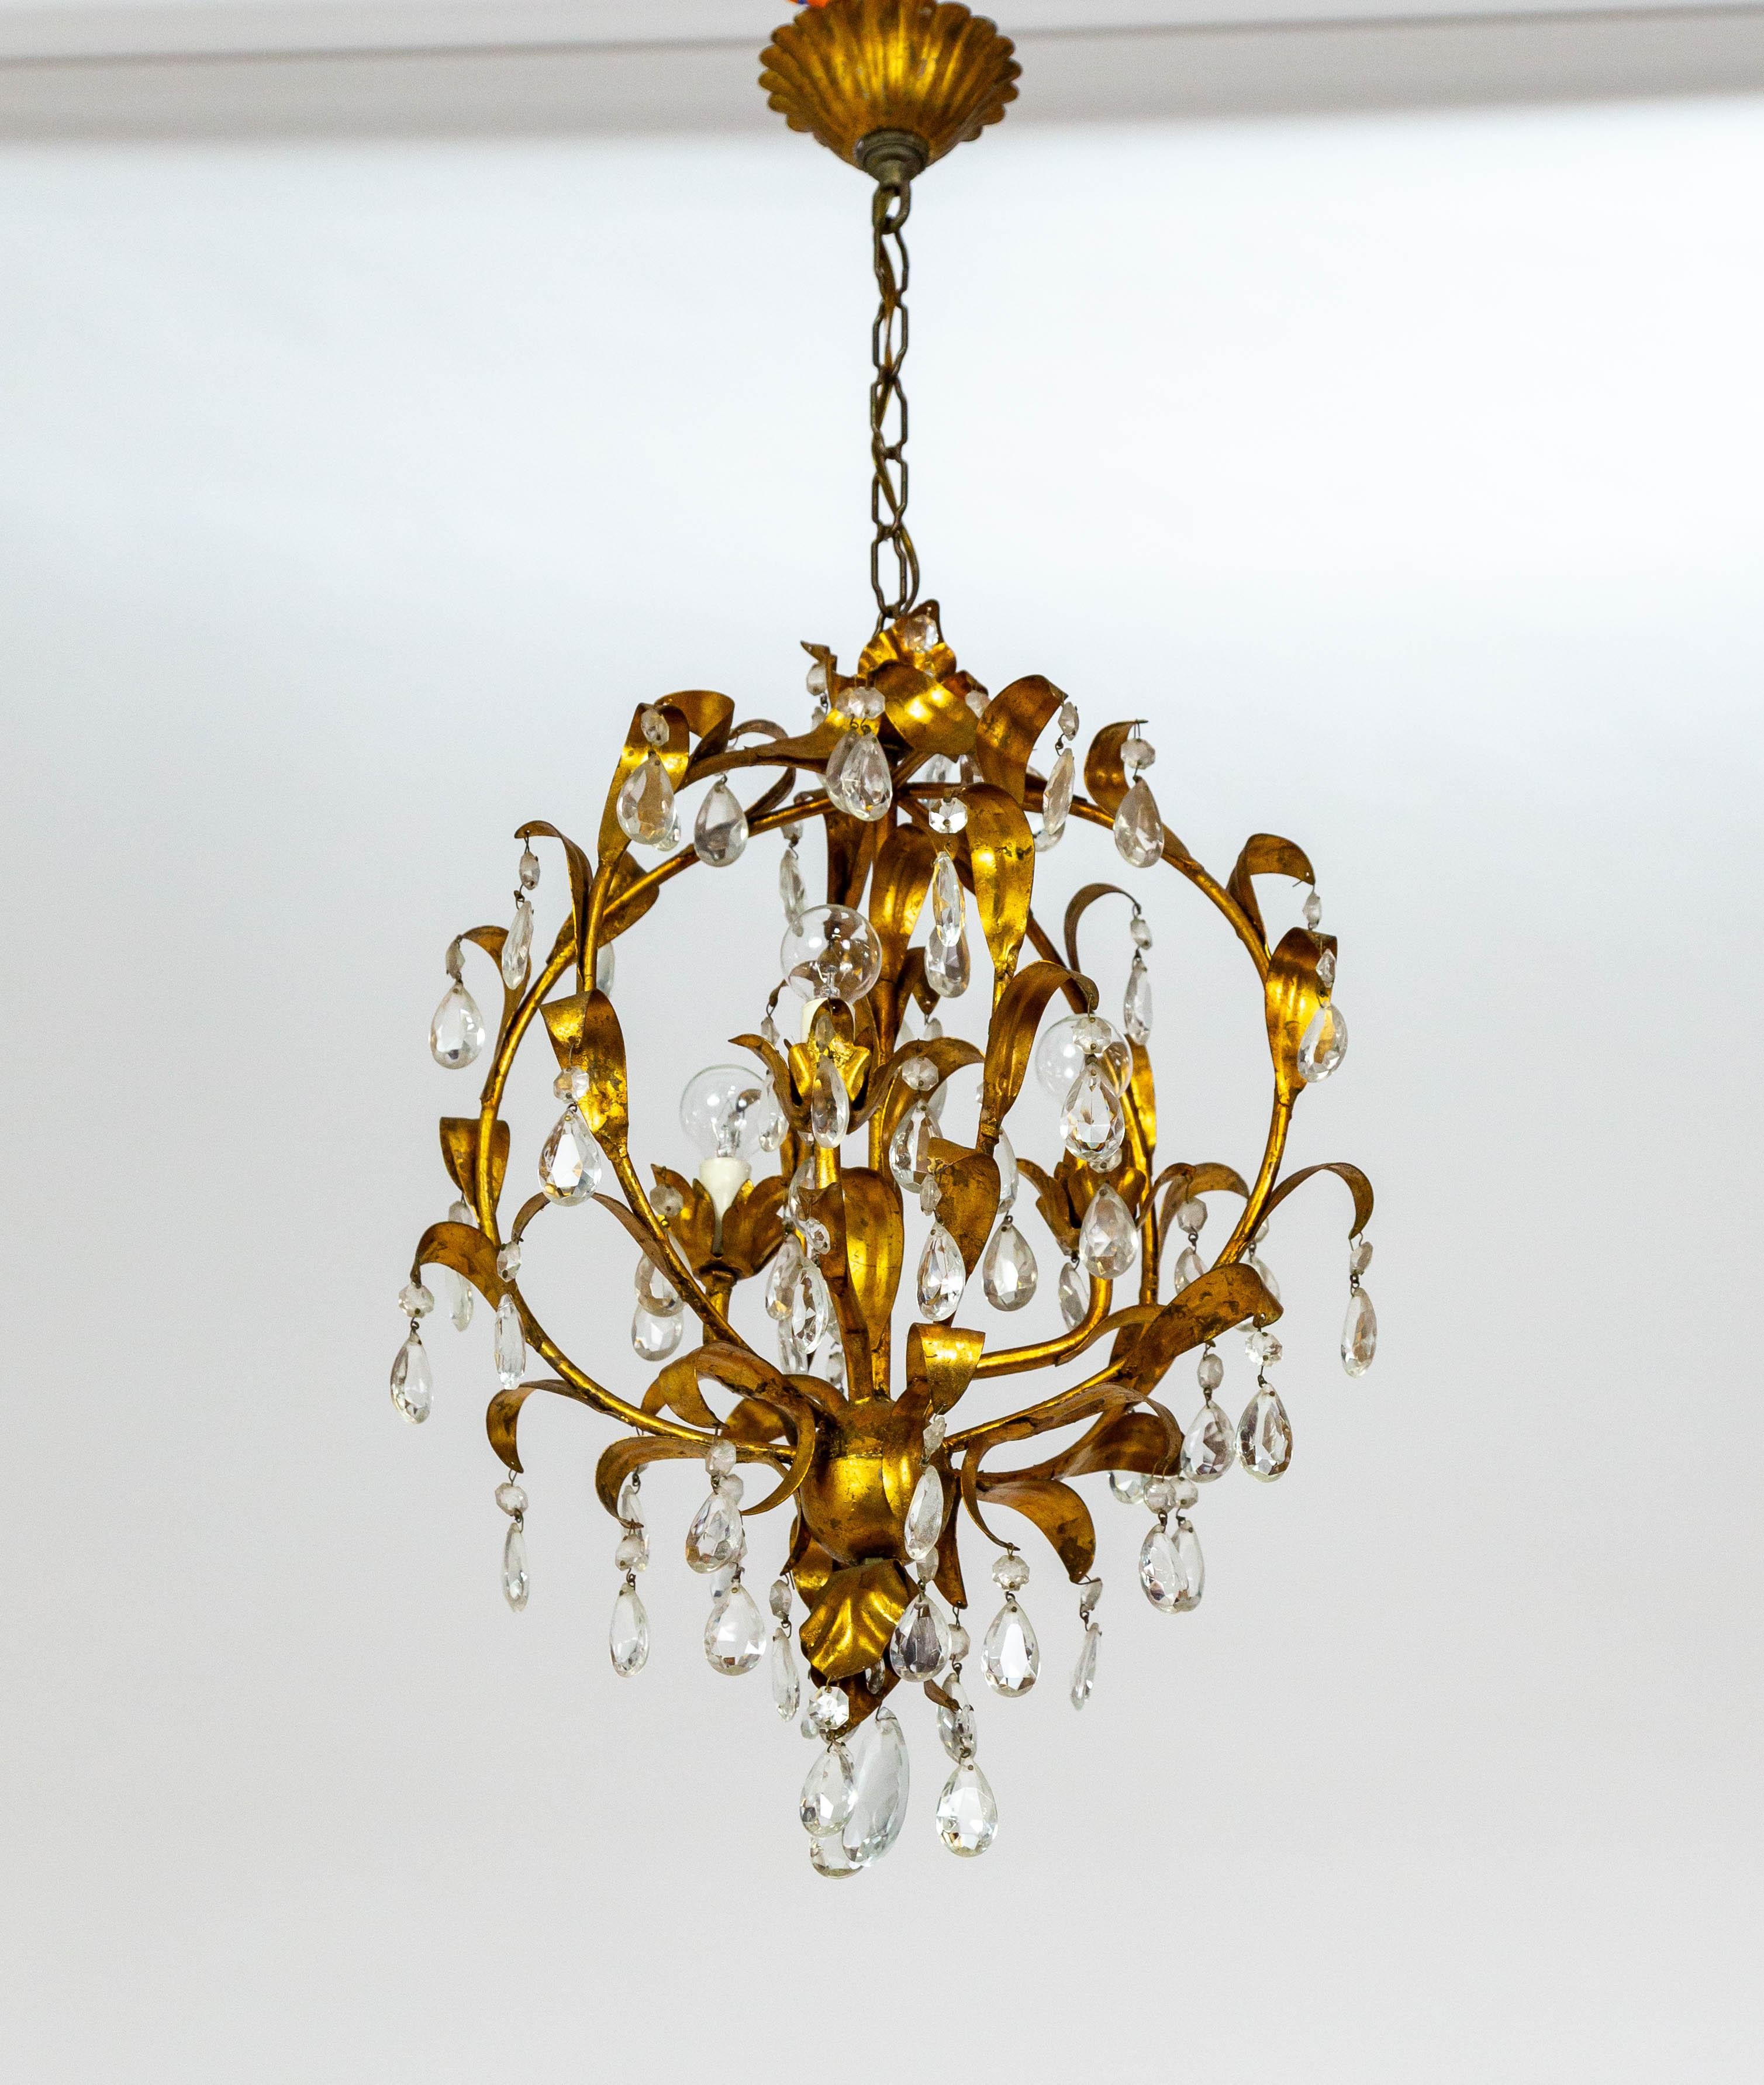 An Italian, gilt metal chandelier in a spherical cage shape. The curling leaves lining the structure dangle octagonal and pendalogue crystals. It has three interior lights (candelabra sockets). A beautiful design. Newly rewired with matching chain